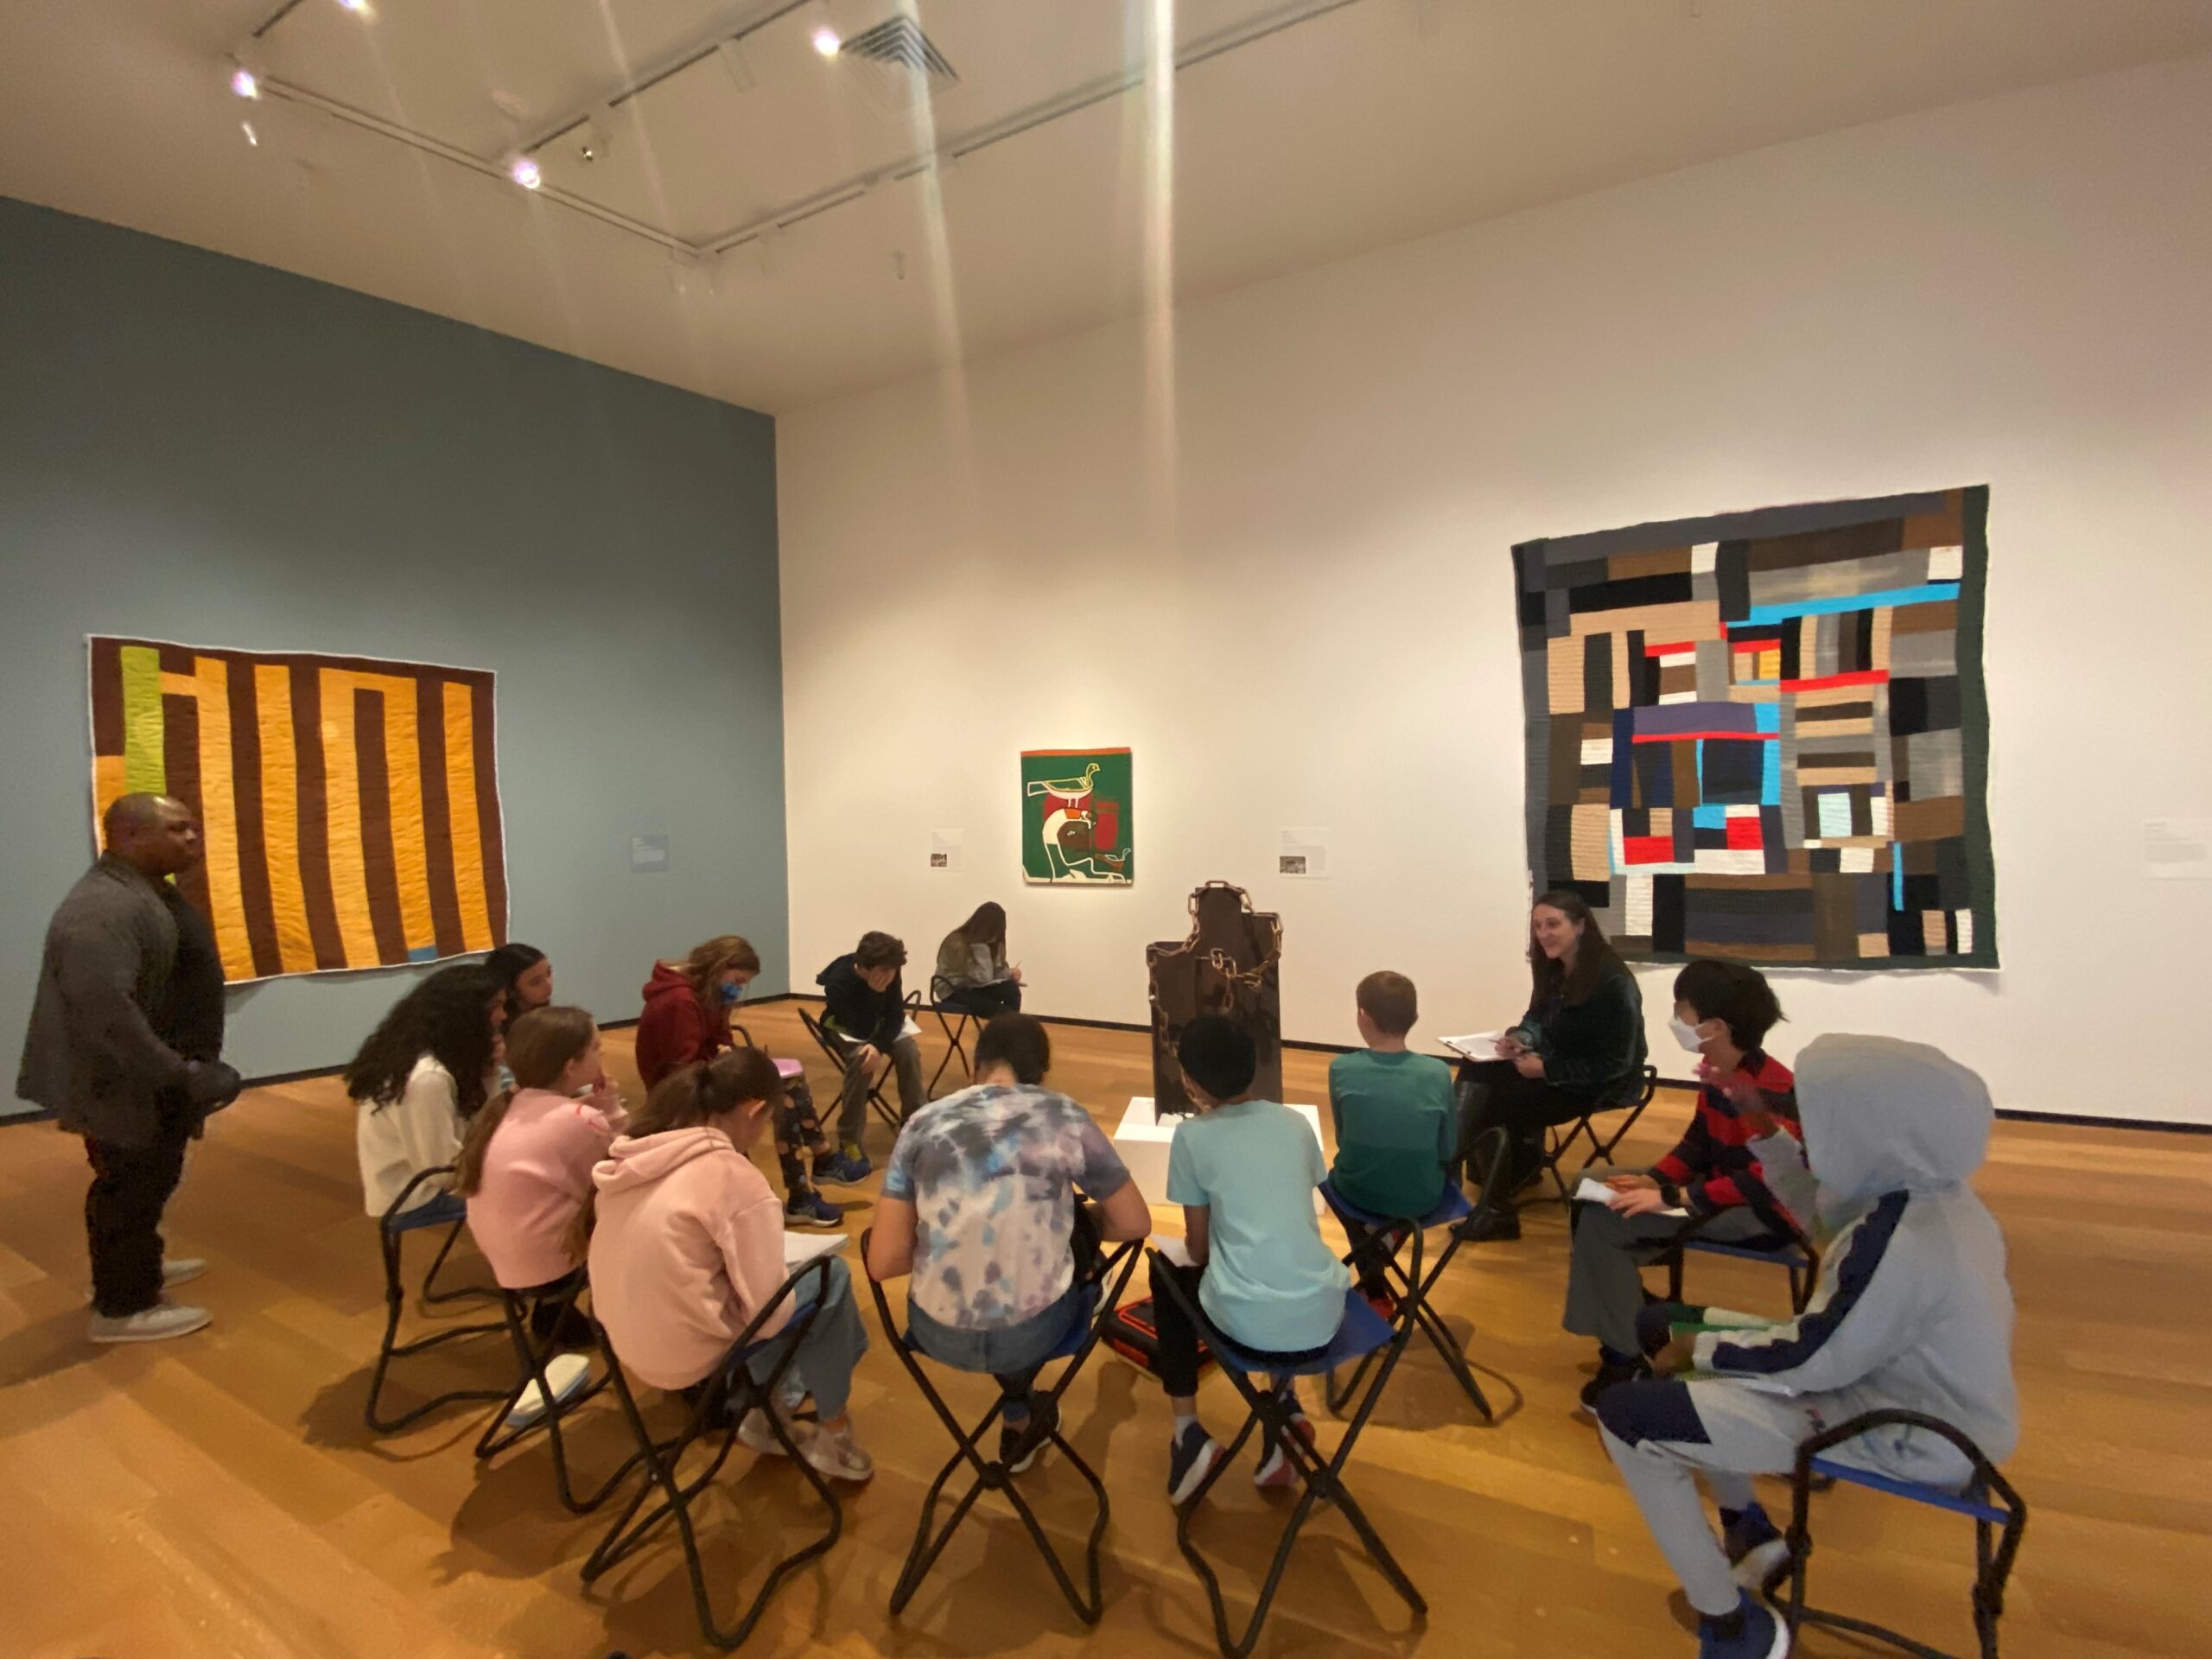 A group of middle-school students sit in stools around a museum educator in an art gallery.